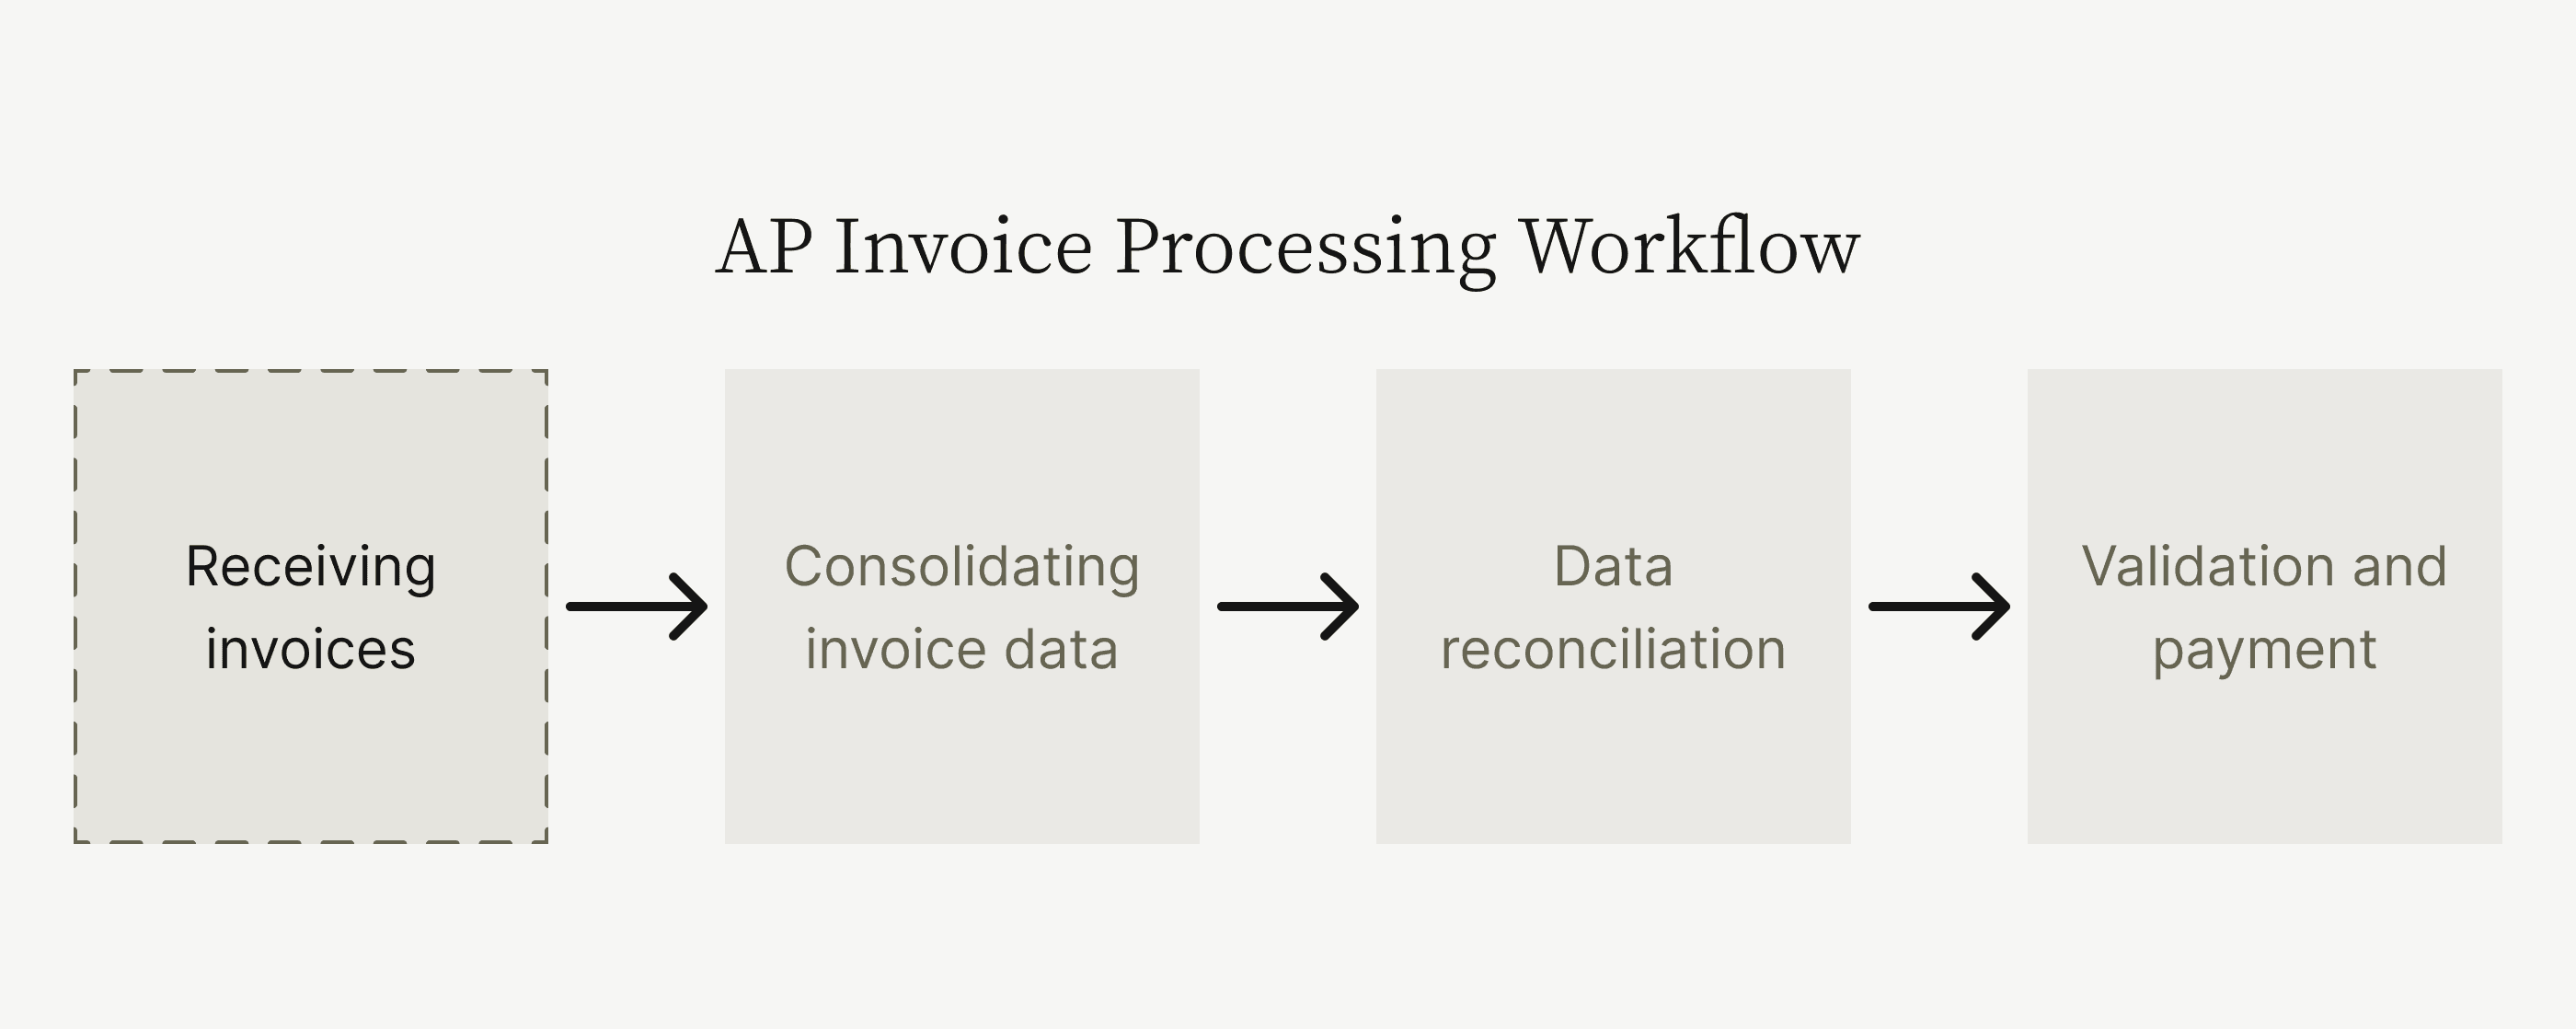 AP invoice processing workflow step 1: receiving invoices